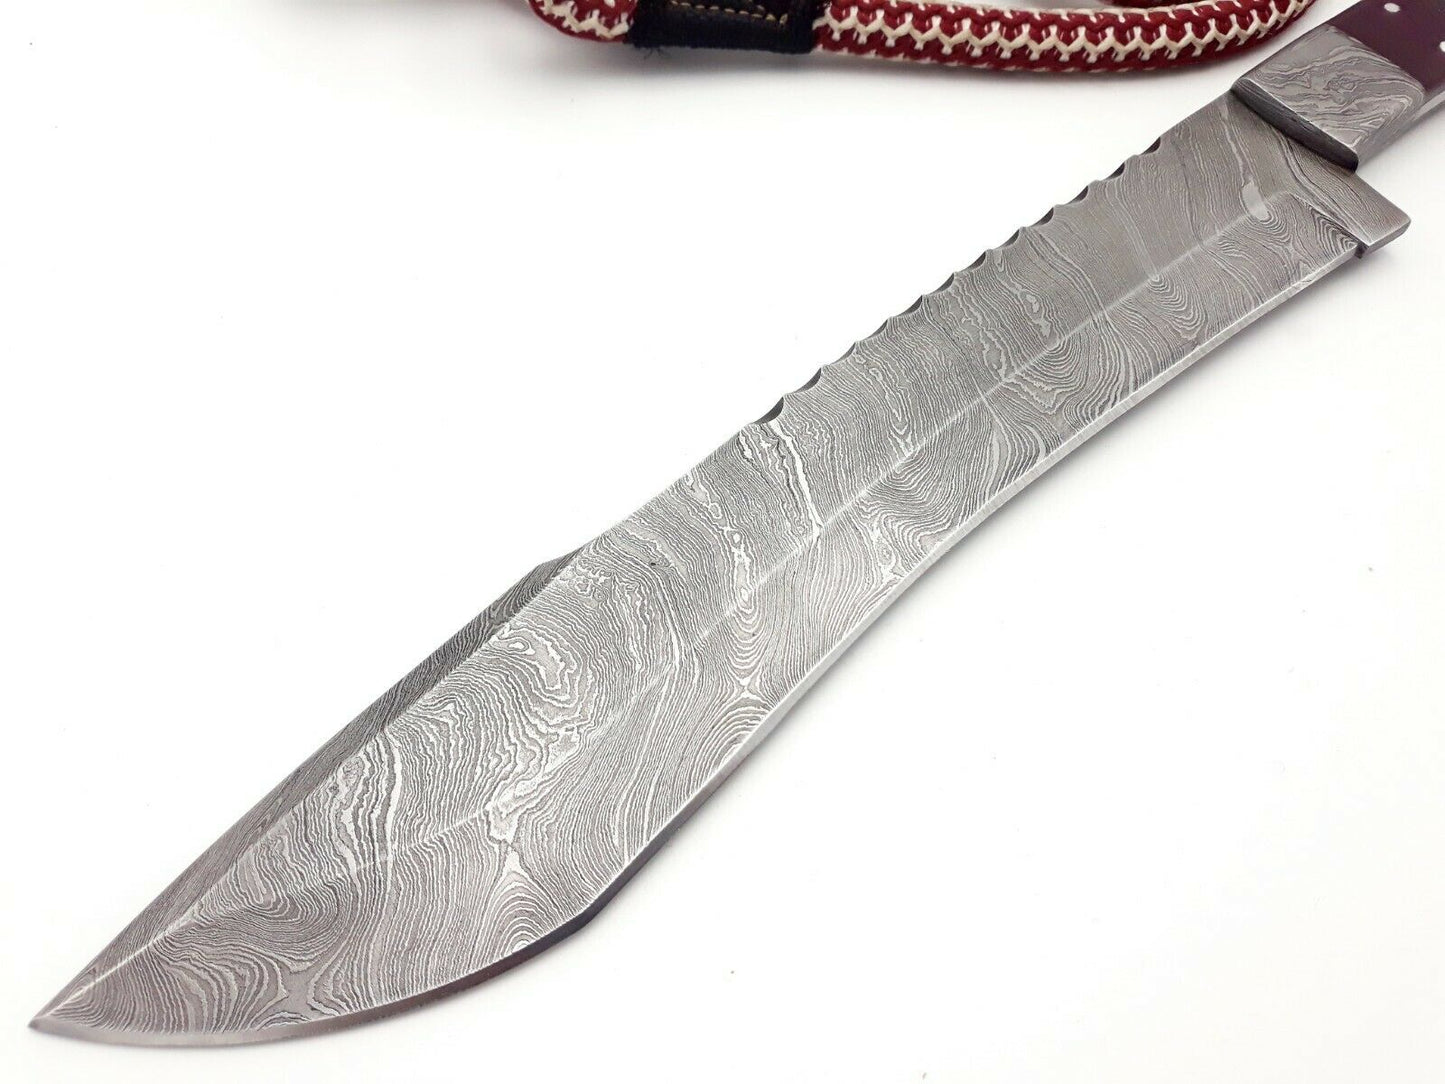 Hand Forged Damascus Utility Fixed Blade Machete Knife Full Tang handle 38cm